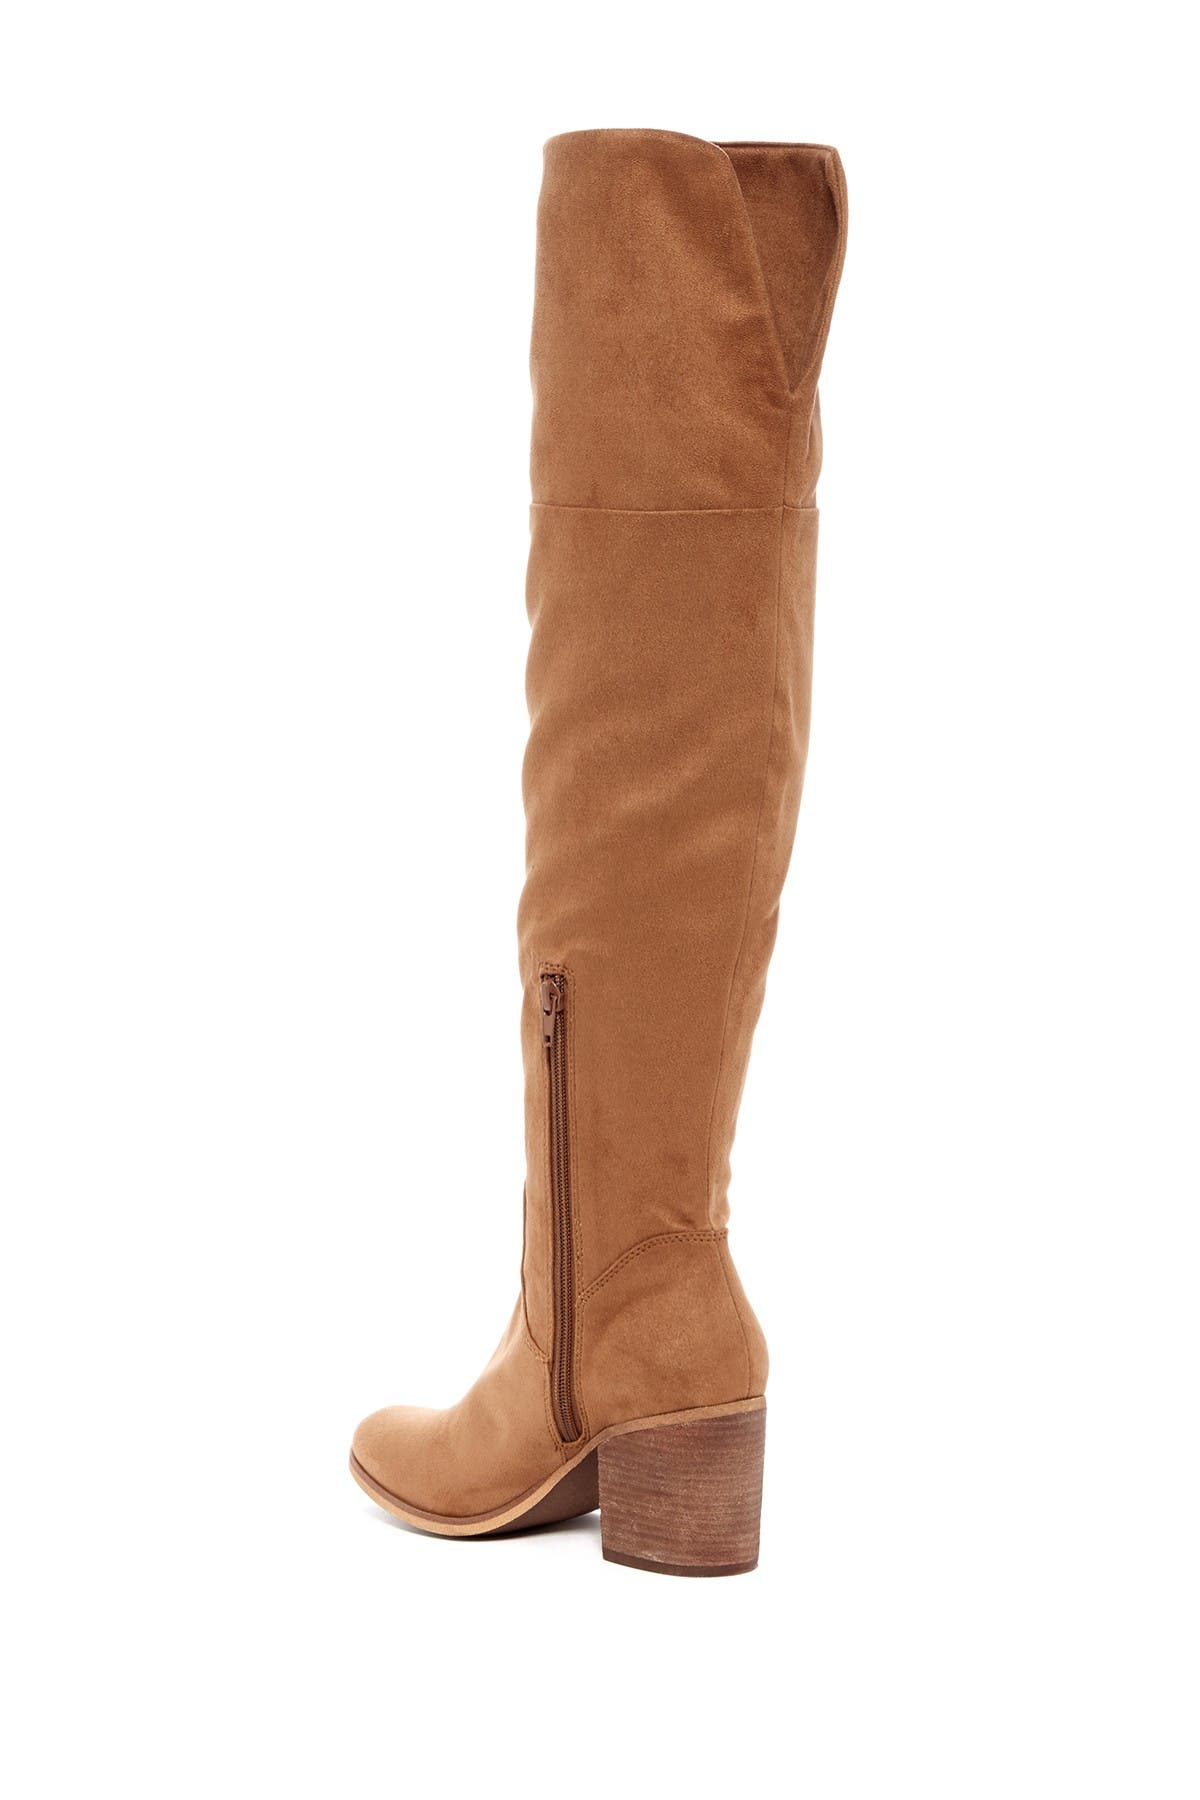 Abound | Stacey Over-the-Knee Boot 